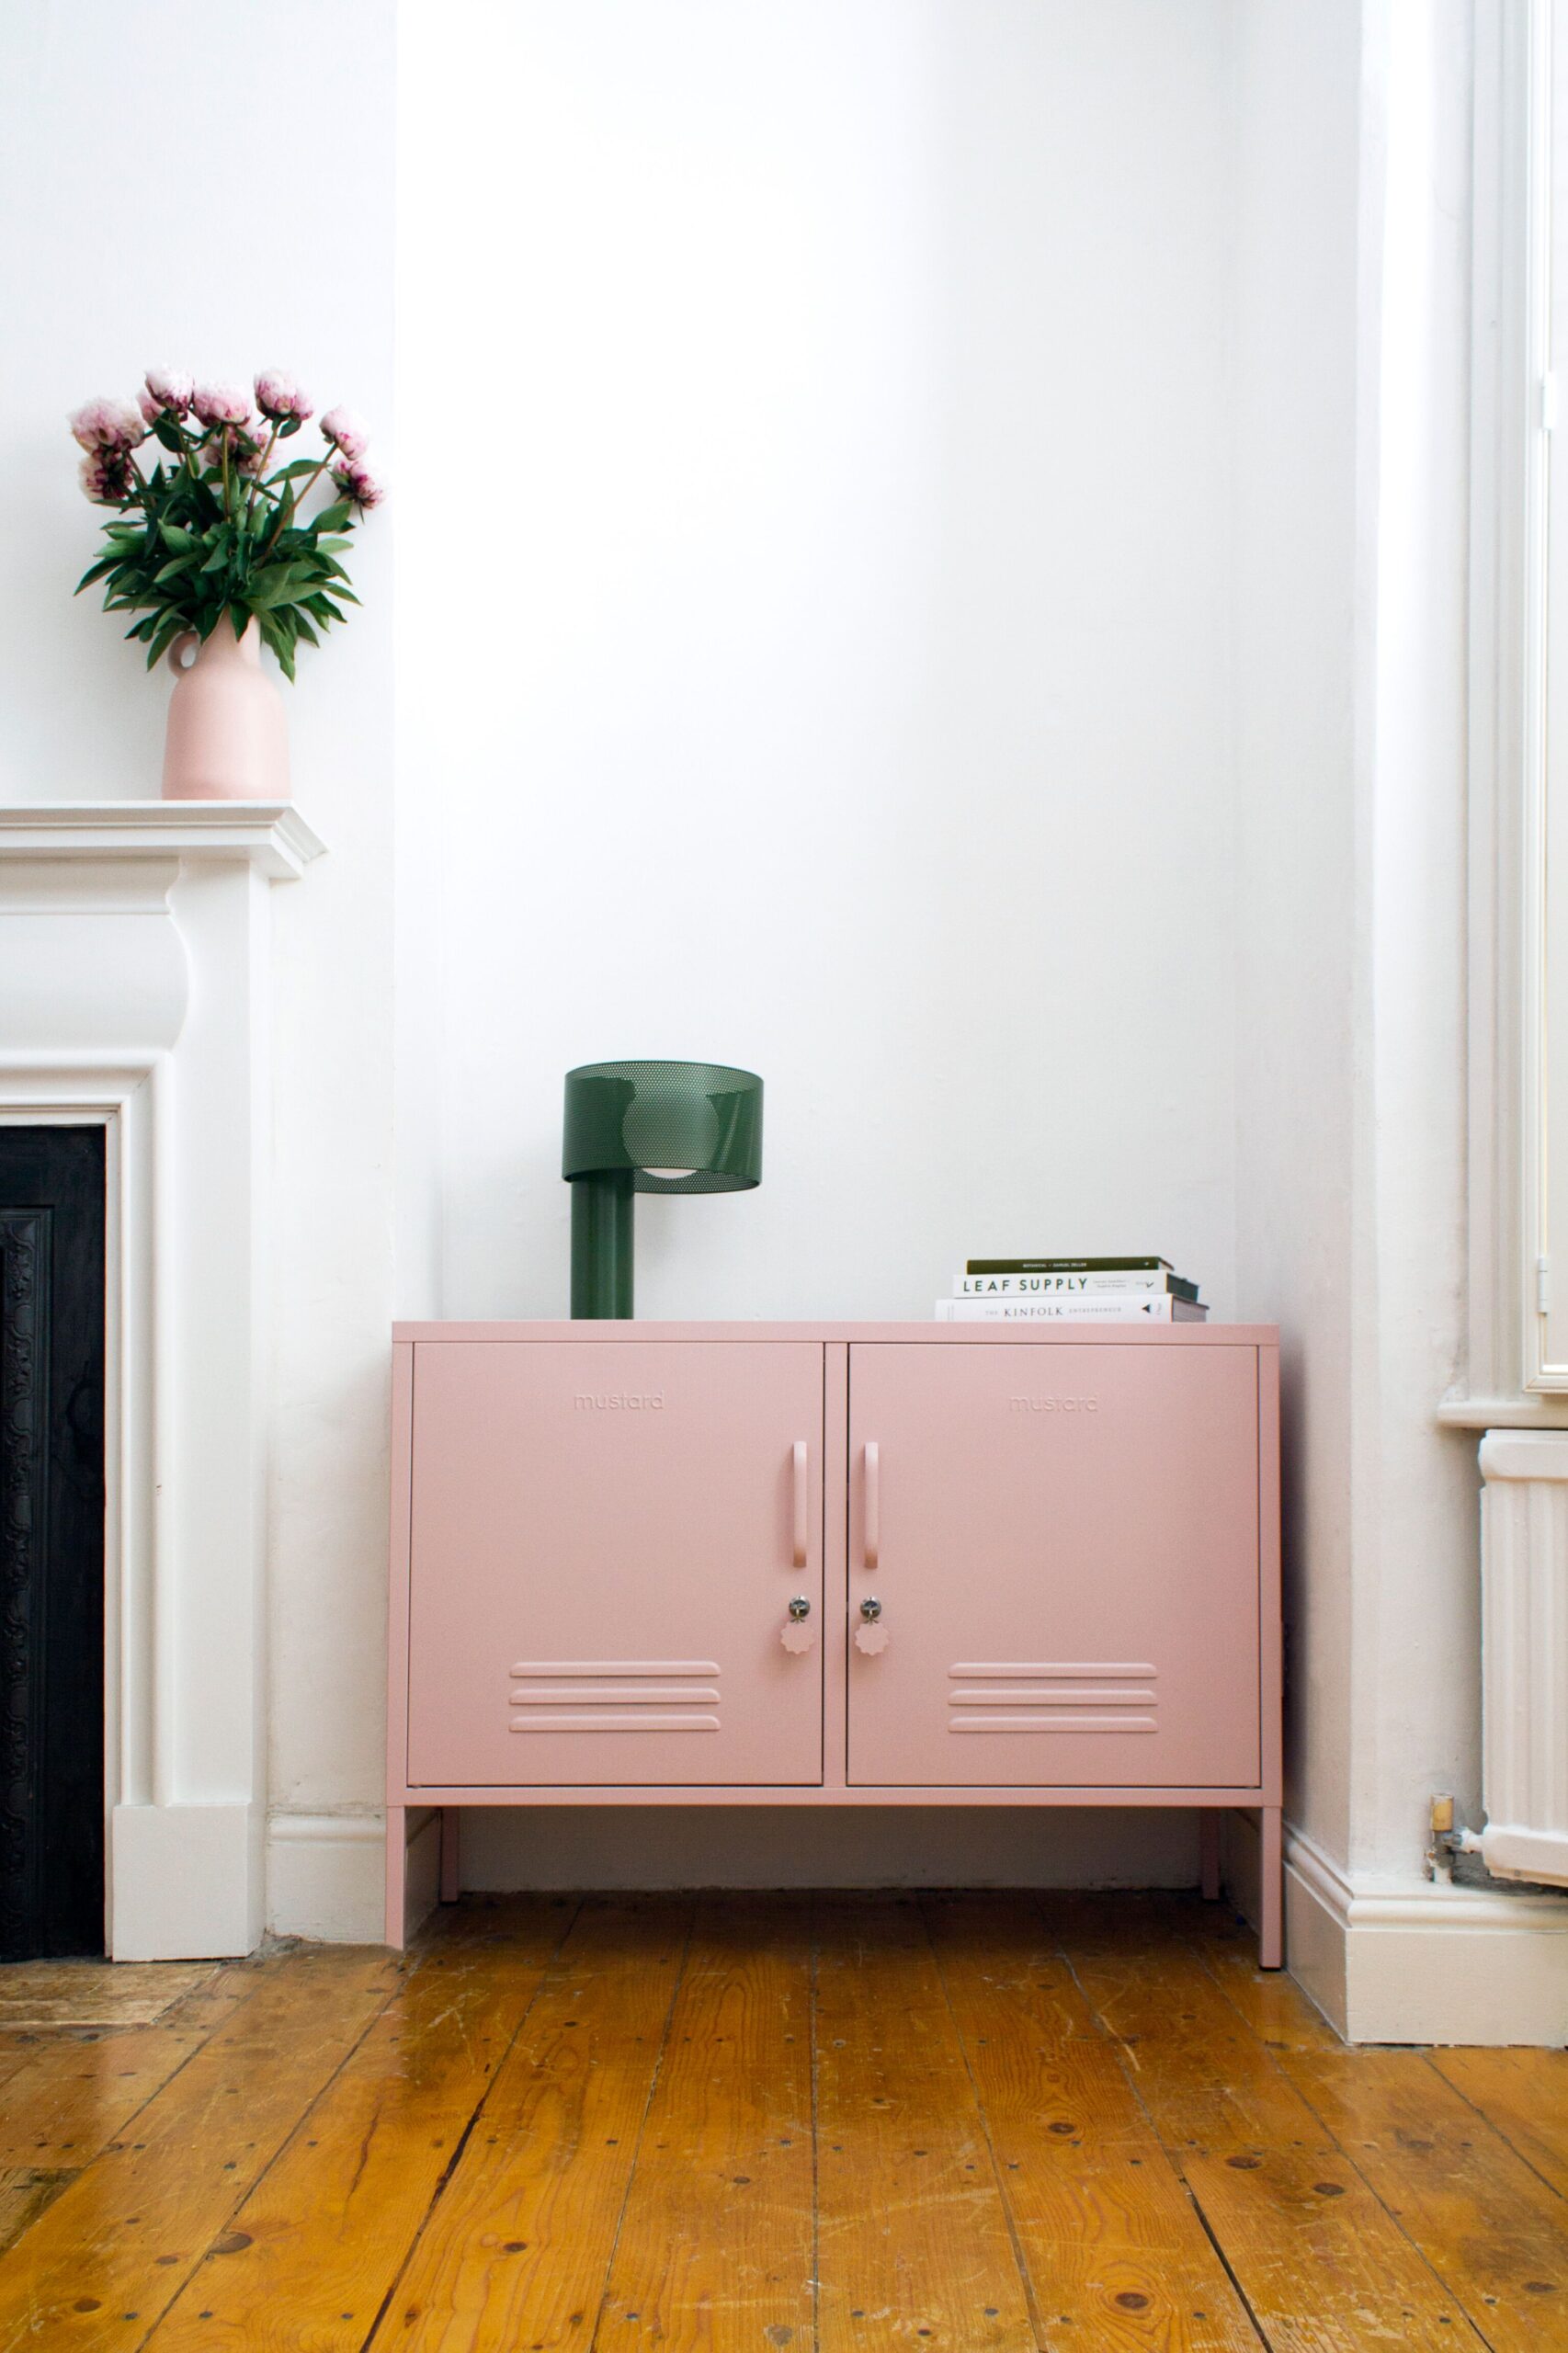 Kate Watson-Smyth discuuses how to put bad lighting right with Helen White, co-founder of Houseof. The green mesh table lamp adds an interesting element and complements the pink metal cabinet. #lighting #tablelamp #madaboutthehouse